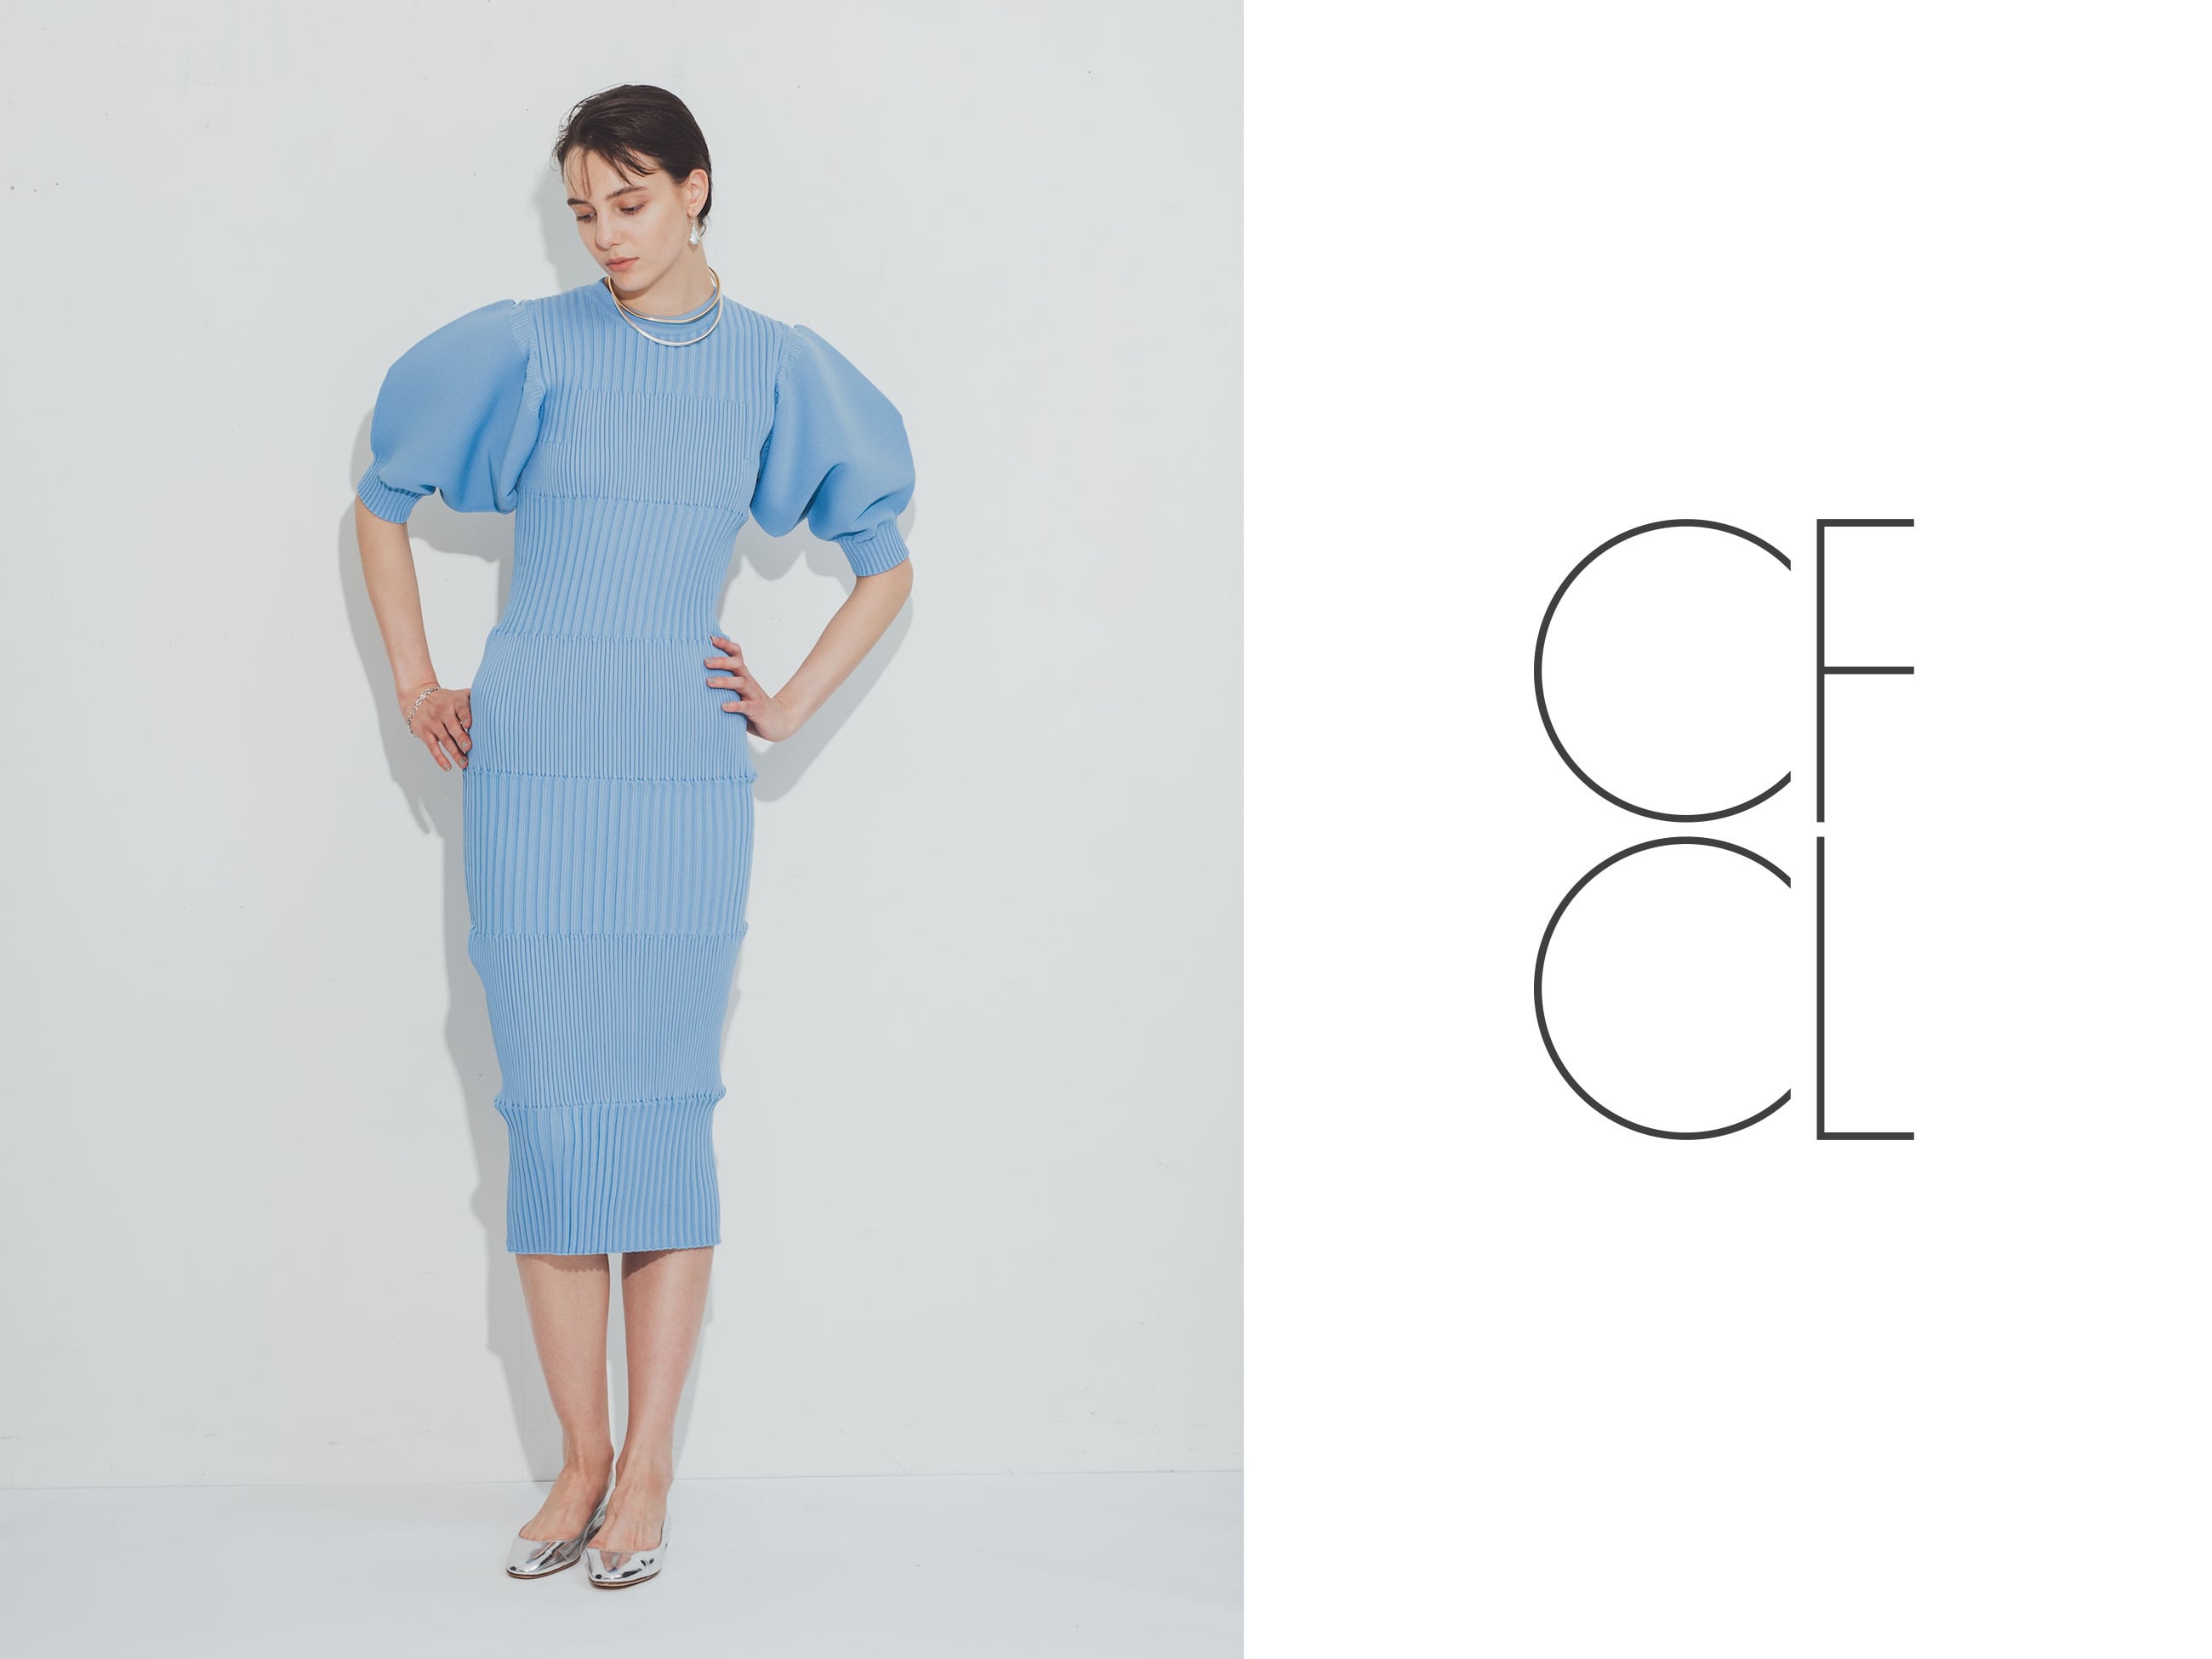 CFCL for Ron Herman ”PUFF SLEEVE DRESS” New Release